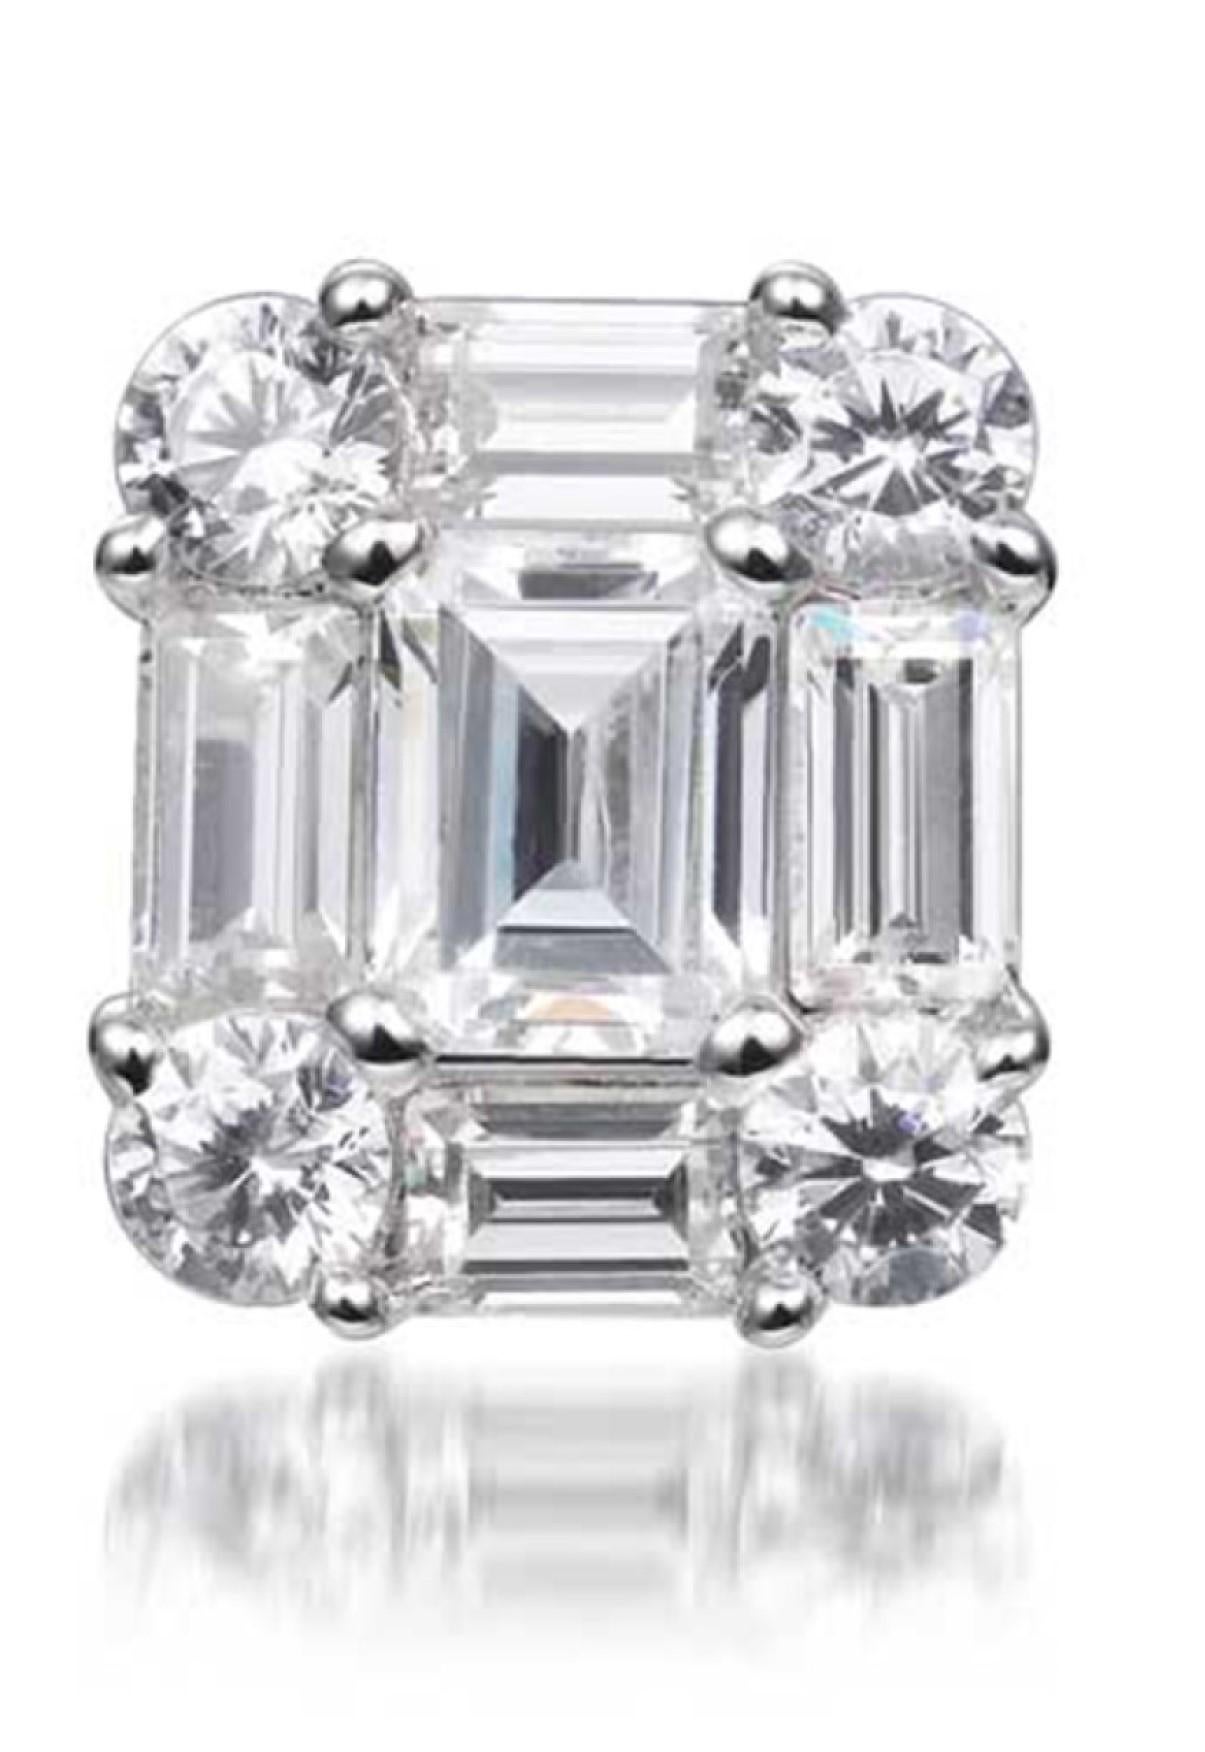 Part of our Diana collection, these enchanting stud earrings feature a captivating emerald cut cubic zirconia at the centre, is flanked on all sides by four mini baguette cuts and has four round brilliant cuts set into the corners, encapsulated in